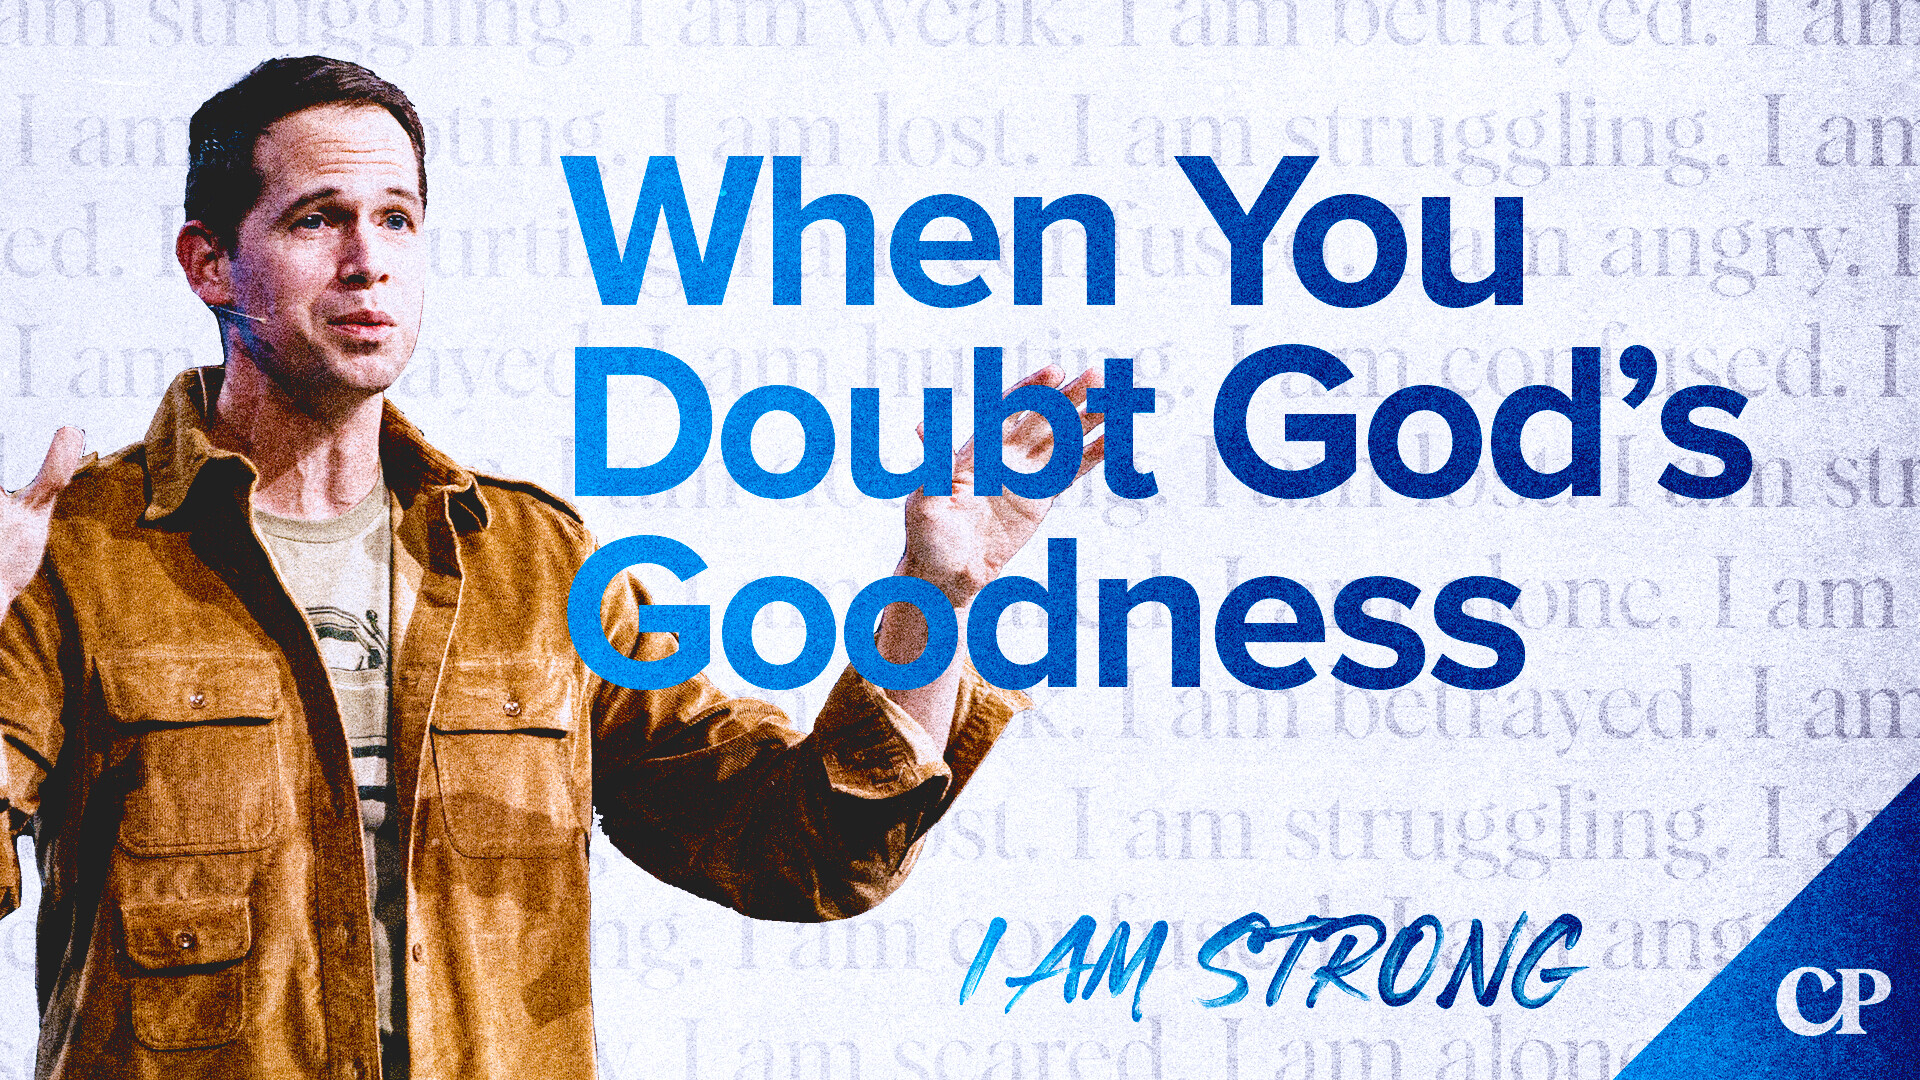 View Message: When You Doubt God's Goodness